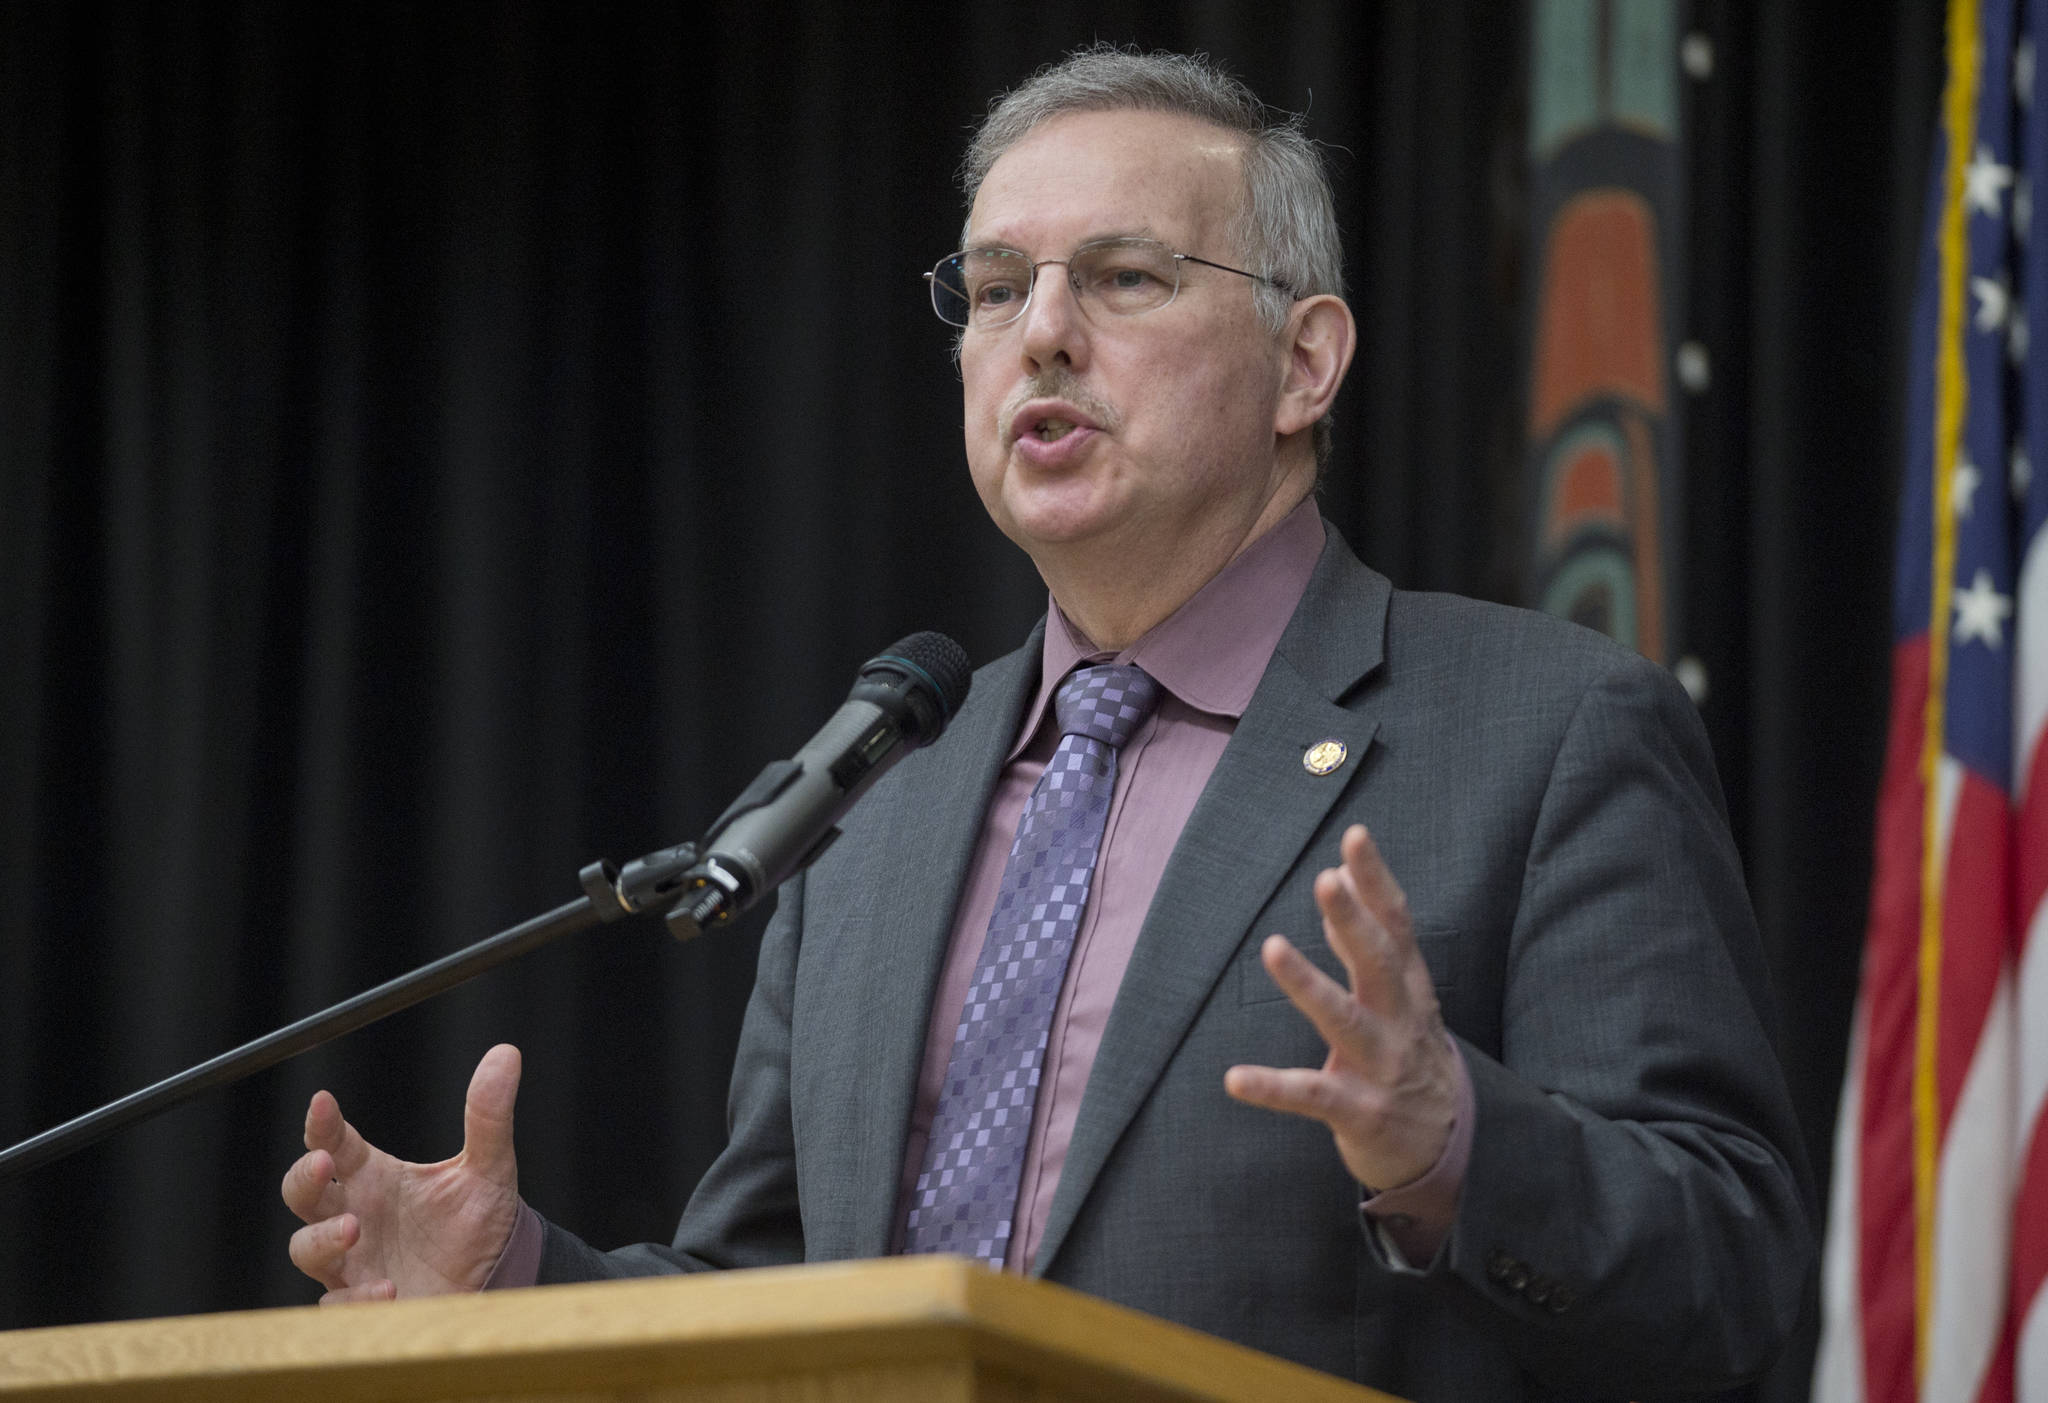 Speaker of the House Bryce Edgmon, D-Dillingham, speaks at the Native Issues Forum in the Elizabeth Peratrovich Hall on Thursday, March 30, 2017. The event is hosted by Central Council of the Tlingit and Haida Indian Tribes of Alaska. (Michael Penn | Juneau Empire)